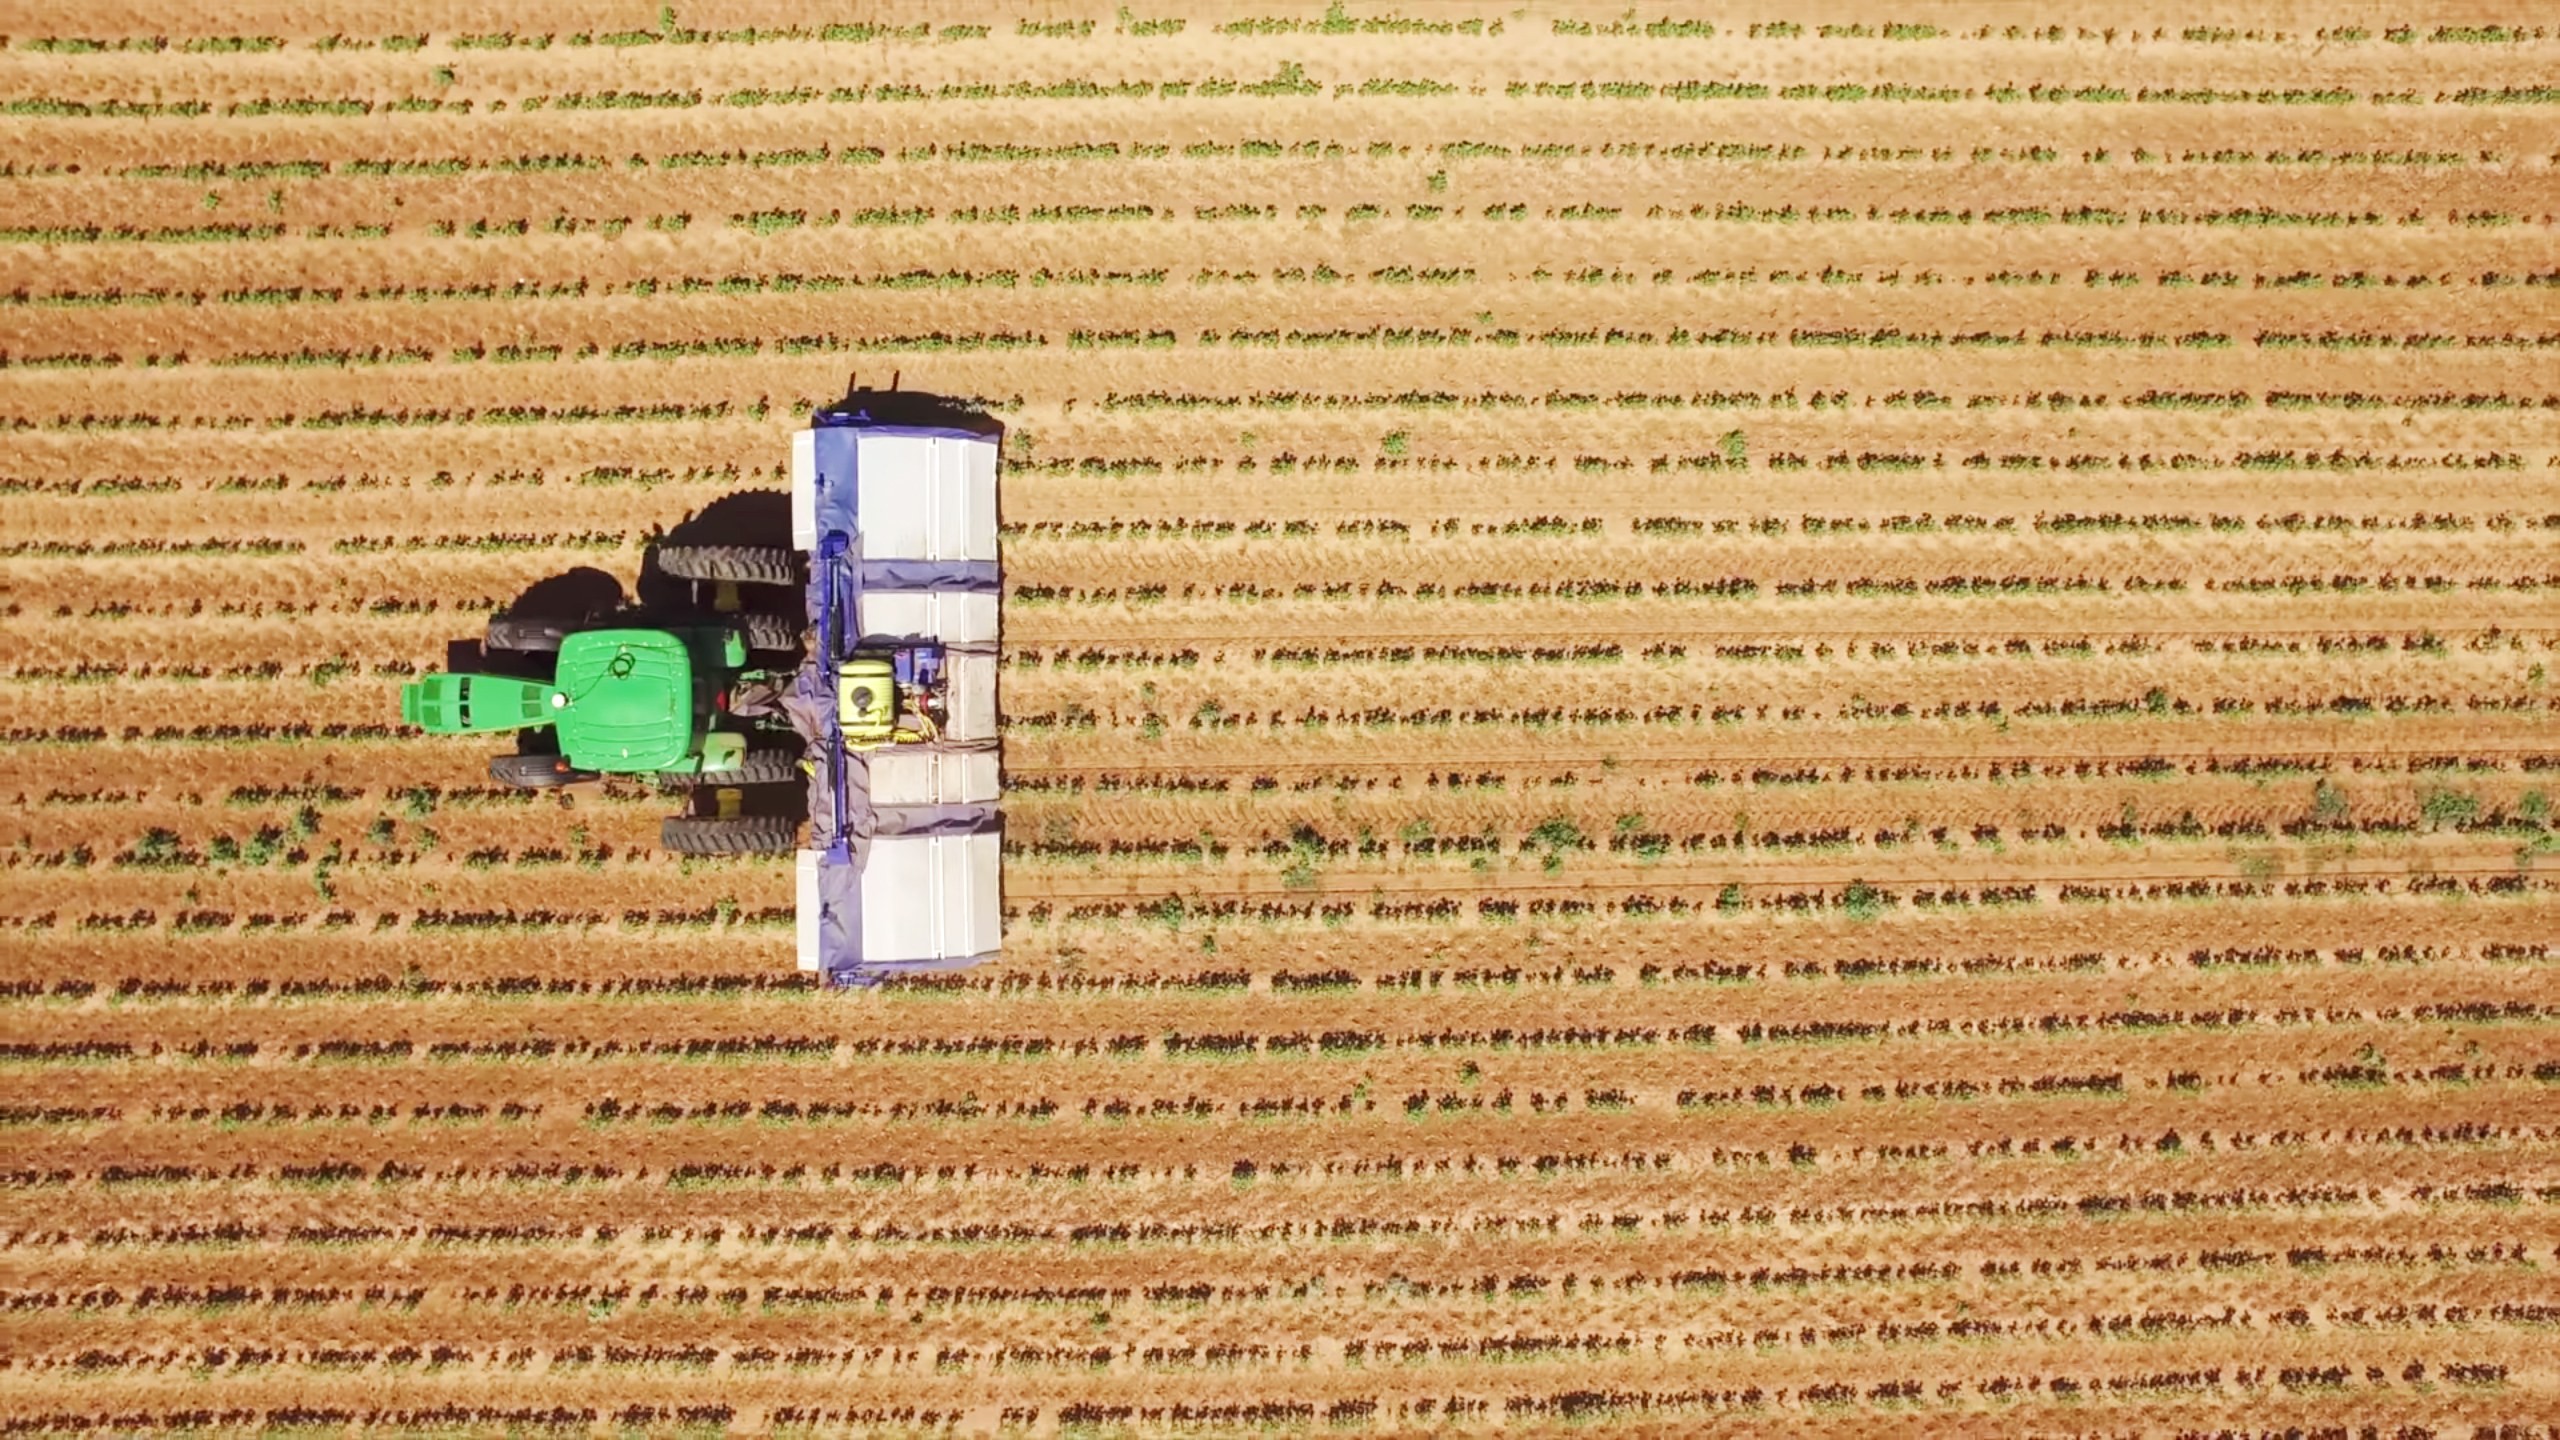 2560x1440 Why John Deere Just Spent $305 Million on a Lettuce-Farming Robot | WIRED